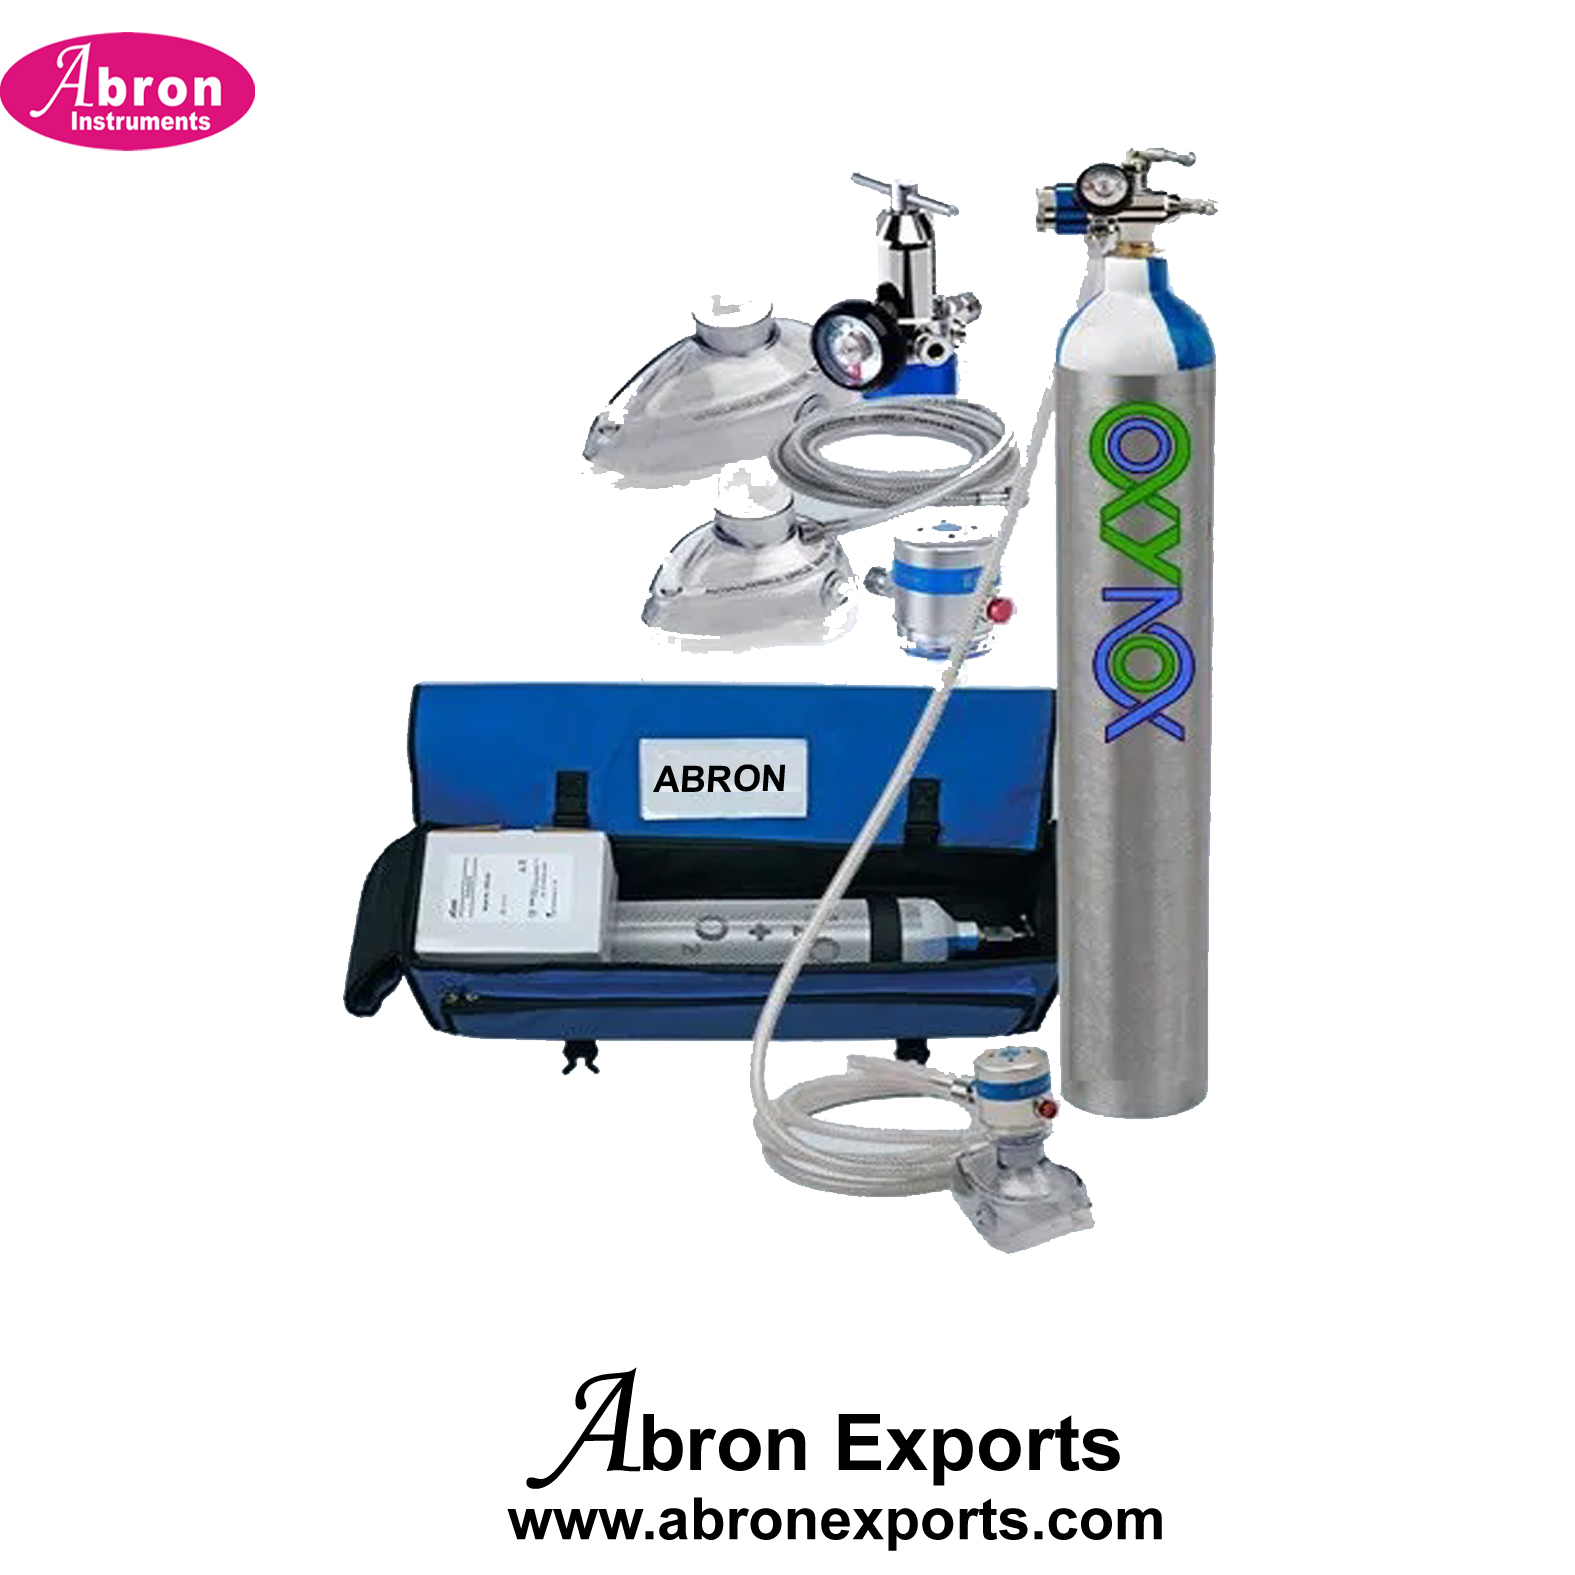 Cylinder ENTONOX Gas Kit 10 Lit 50+50 homogenous gas mixture containing 50% nitrous oxide and oxygen by volume compressed in a cylinder Pain releaver Abron ABM-1140K10 